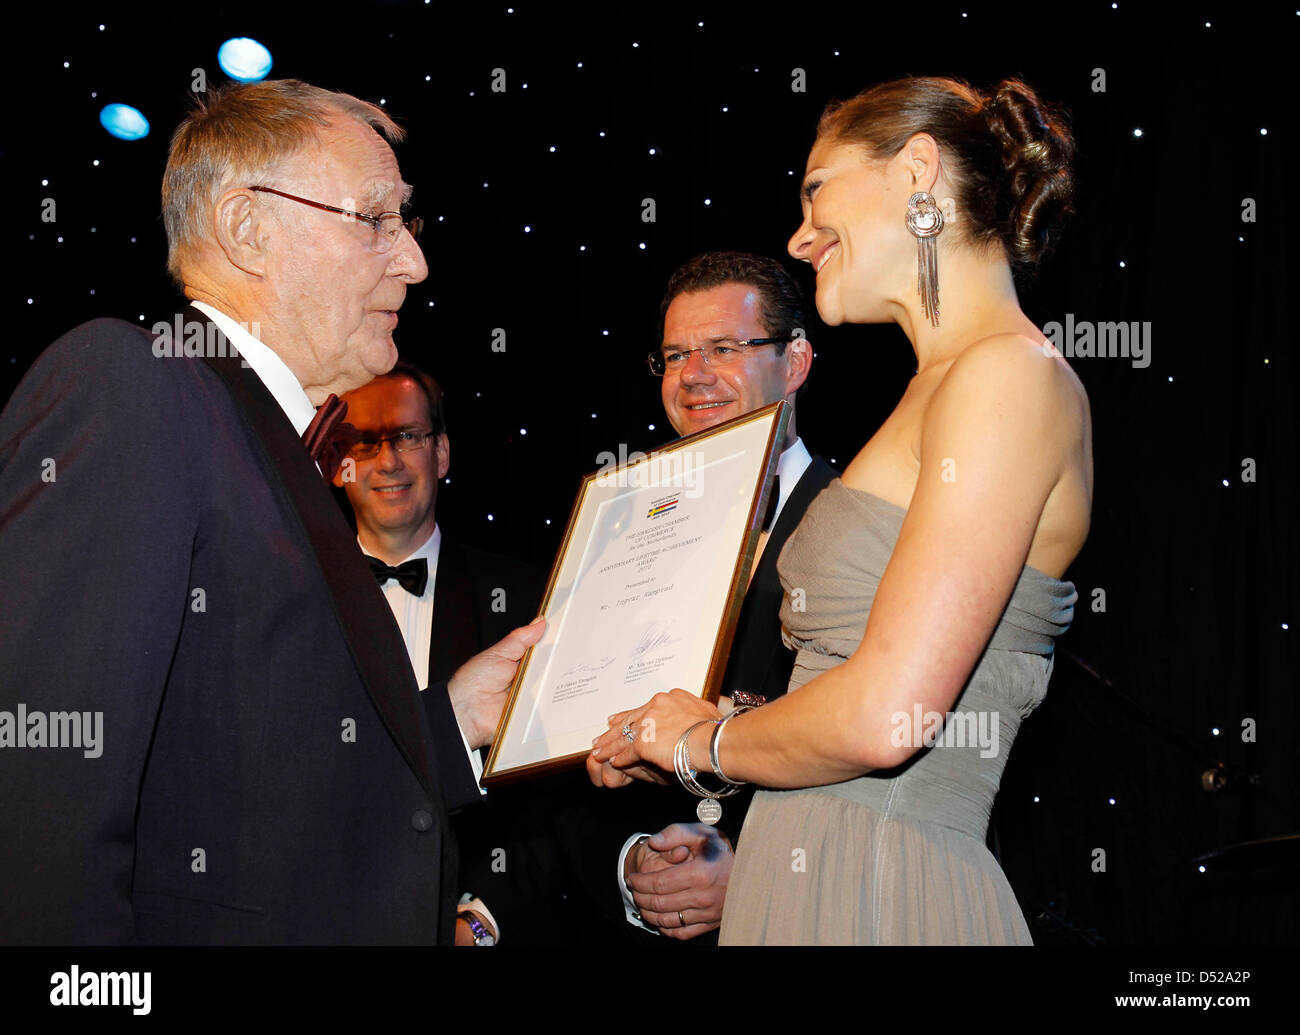 Crown Princess Victoria of Sweden (R) hands over The Swedish Chamber of Commerce Lifetime Achievement Award to 77-year-old founder of IKEA, Ingvar Kamprad (L) during the gala dinner on the 50th anniversary of the Swedish Chamber of Commerce in Noordwijk, the Netherlands, 28 October 2010. Photo: Reni van Maren/Pool ( NETHERLANDS OUT) Stock Photo